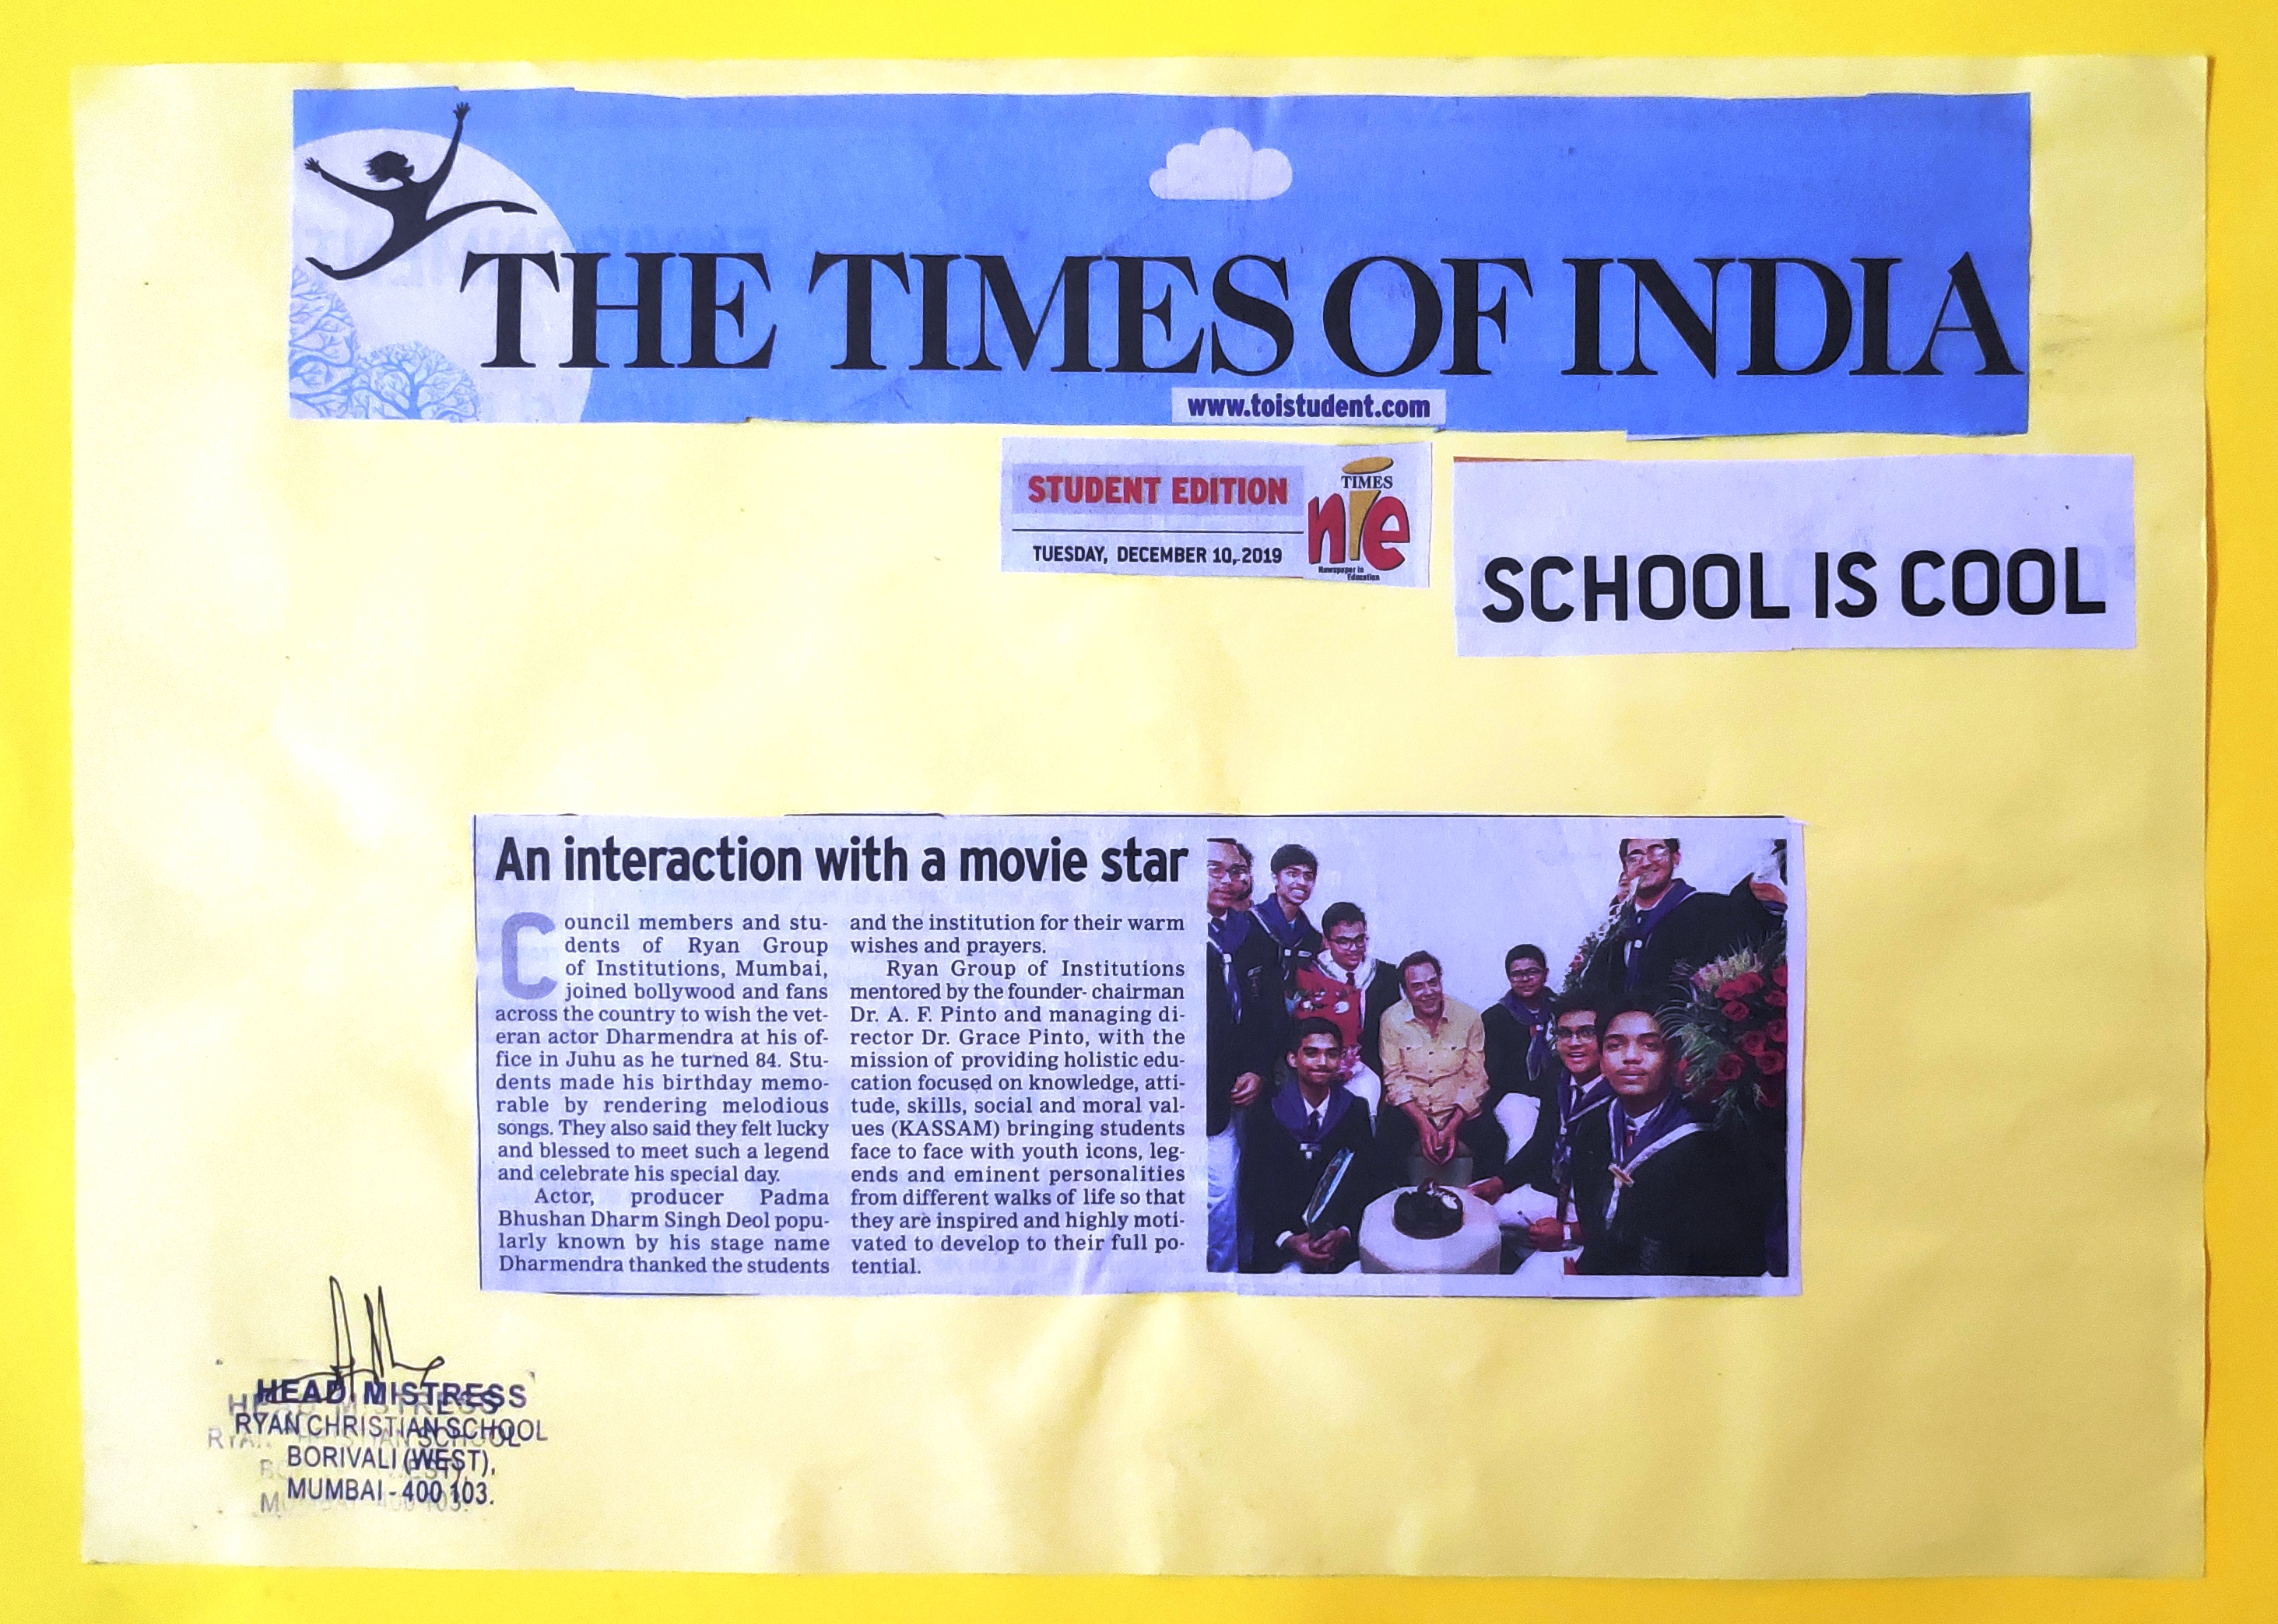 Interaction with Dharmendra was featured in Times Of India